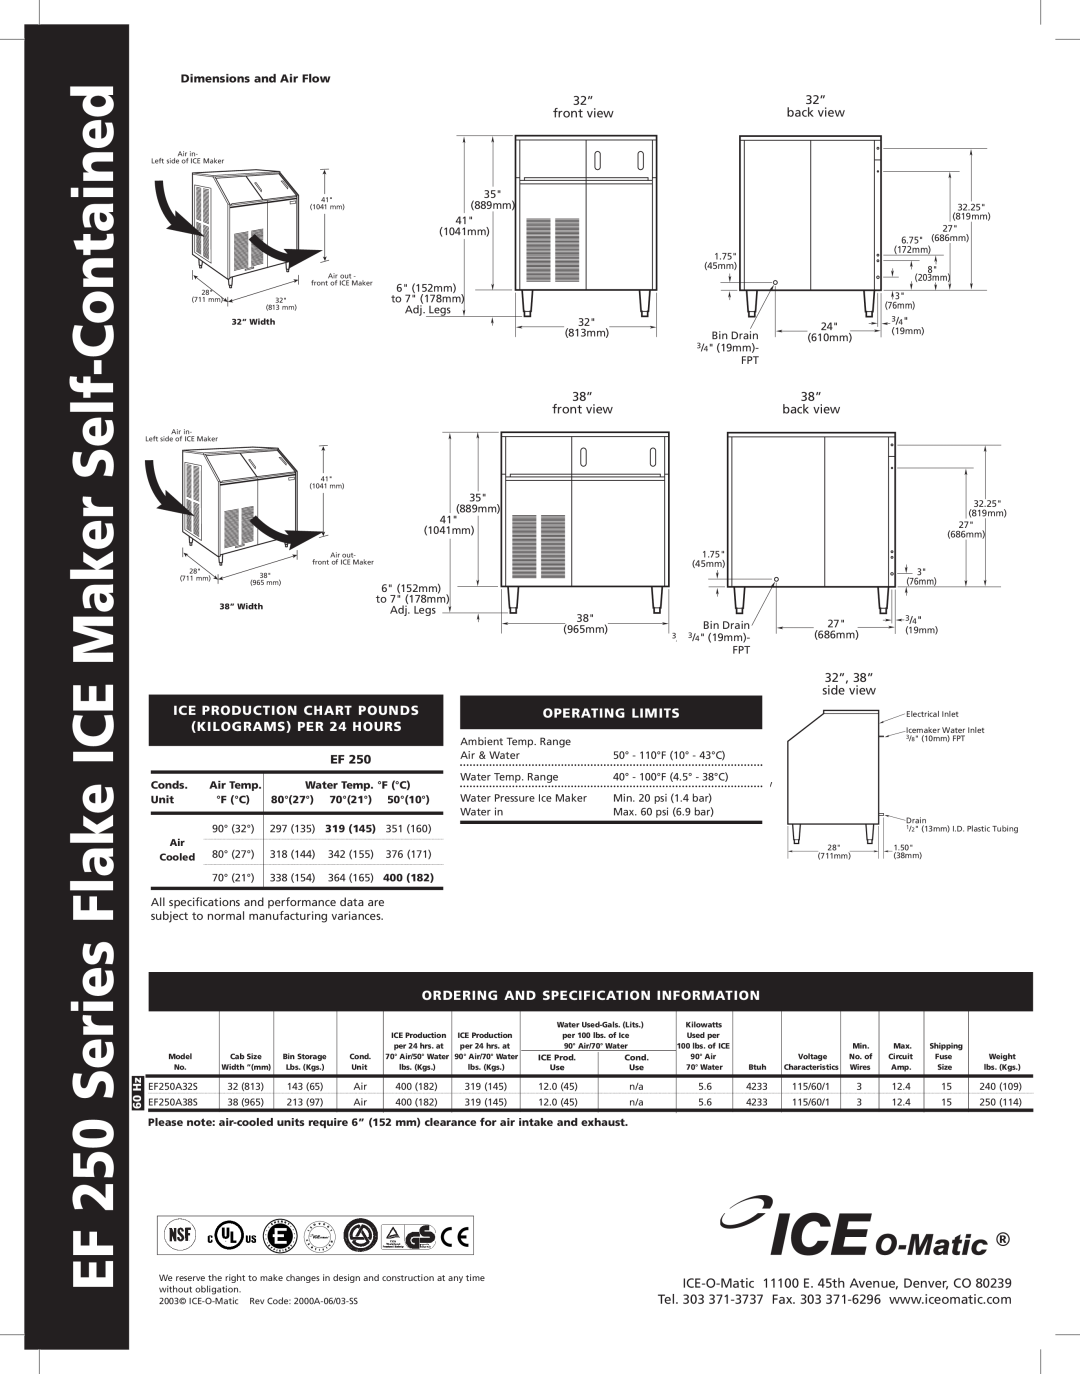 Ice-O-Matic EF250 Contained, Maker, Self, EF 250 Series Flake ICE, Ice Production Chart Pounds, KILOGRAMS PER 24 HOURS 